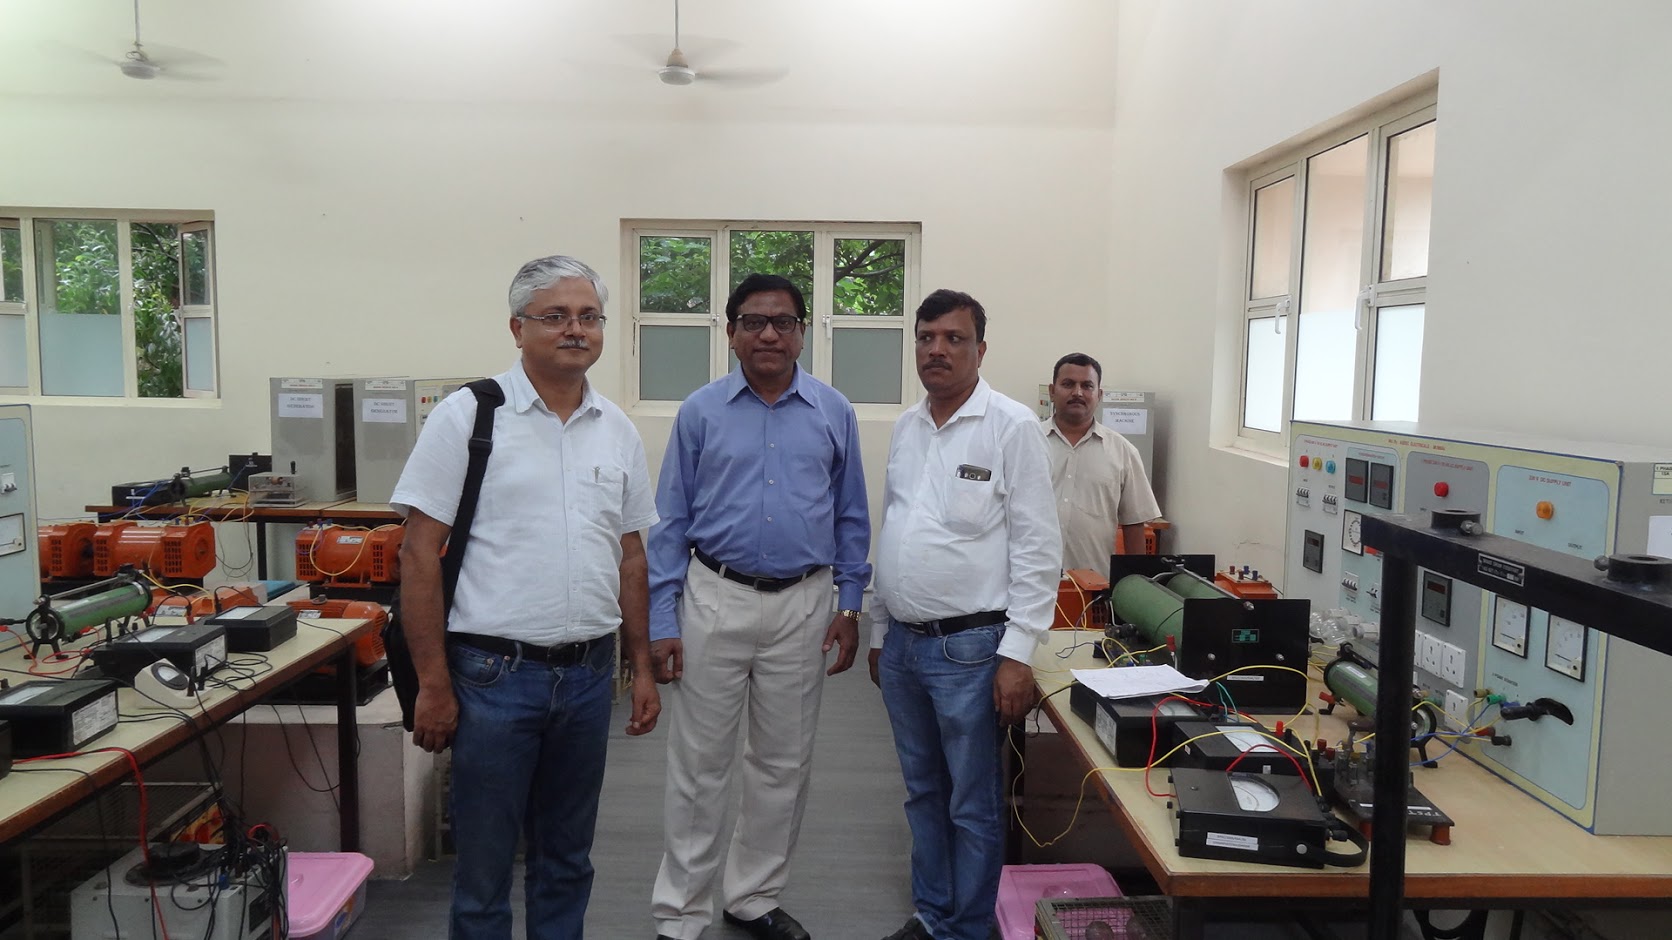 Visit of Mr. R. S. Baoni, Chairman of Start-Up BiSquare and an entrepreneur in the area of Electronics Product Design